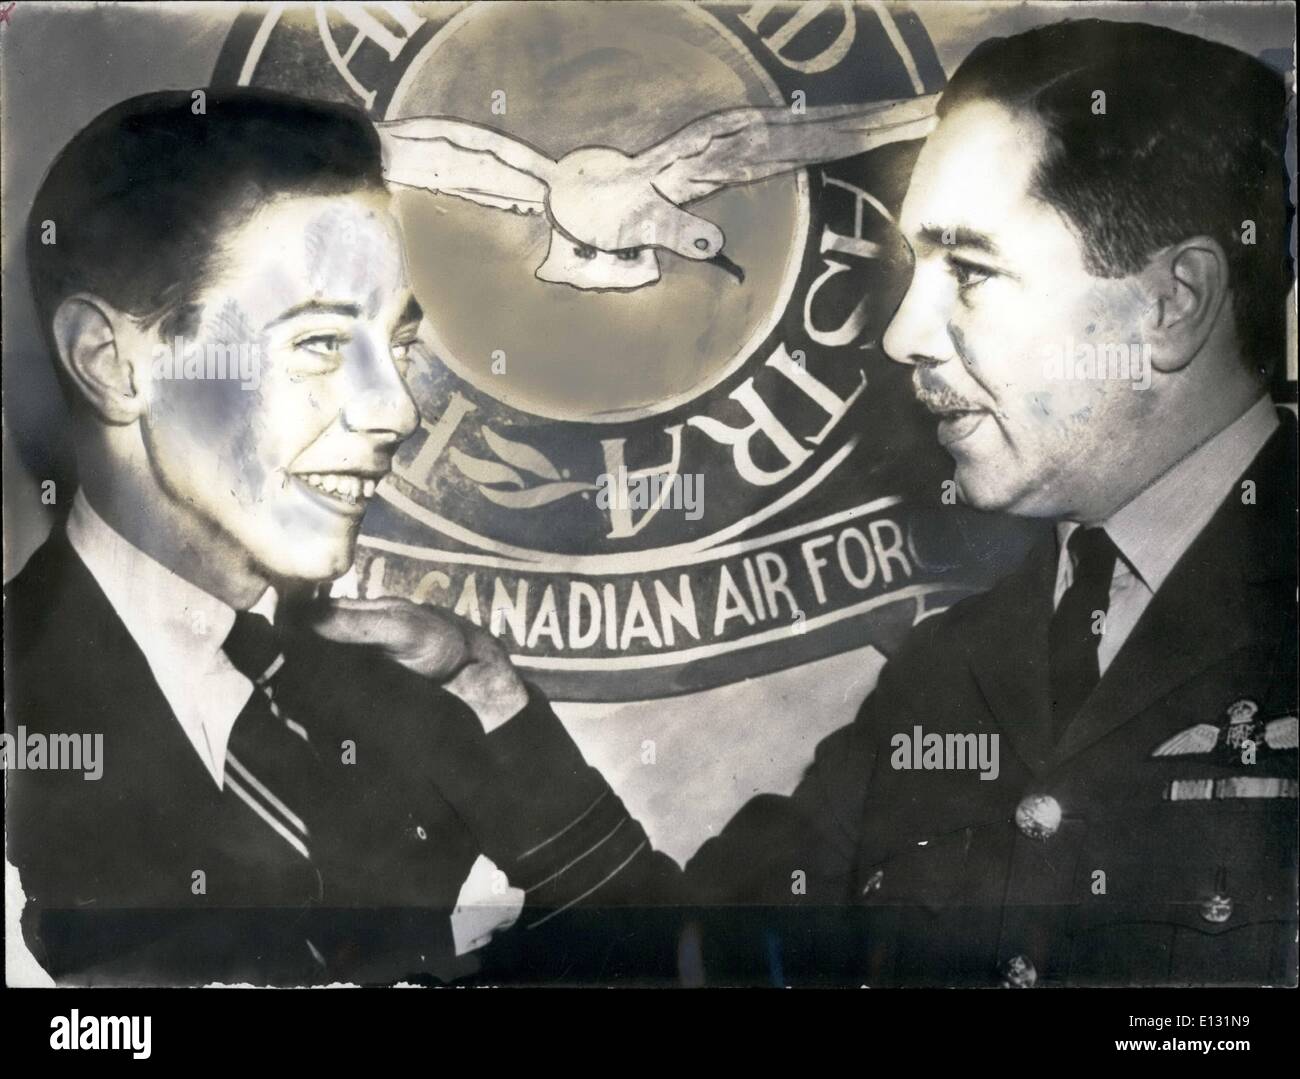 Feb. 26, 2012 - L.R: Pierre Rodier and Pacher Paul G. Rodier. Son Sues Daddy for support: Taschereau Pierre Rodier and his father, Paul G. Rodier, shown here in 1942 when both served int he Royal Canadian Air Force. Stock Photo